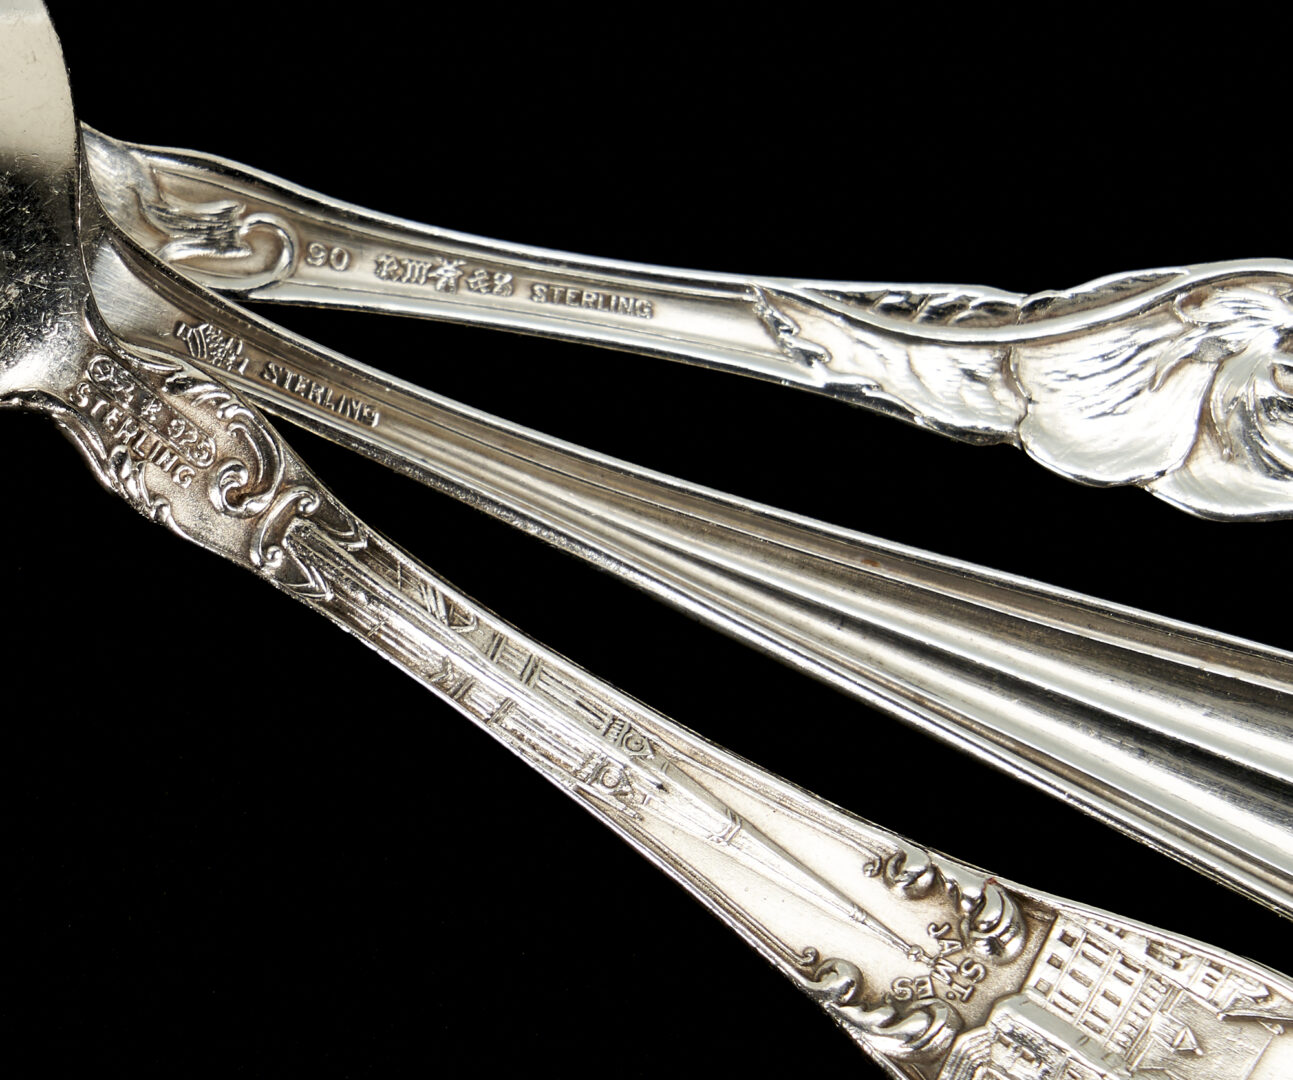 Lot 443: 34 Assorted Sterling Silver Flatware Pieces